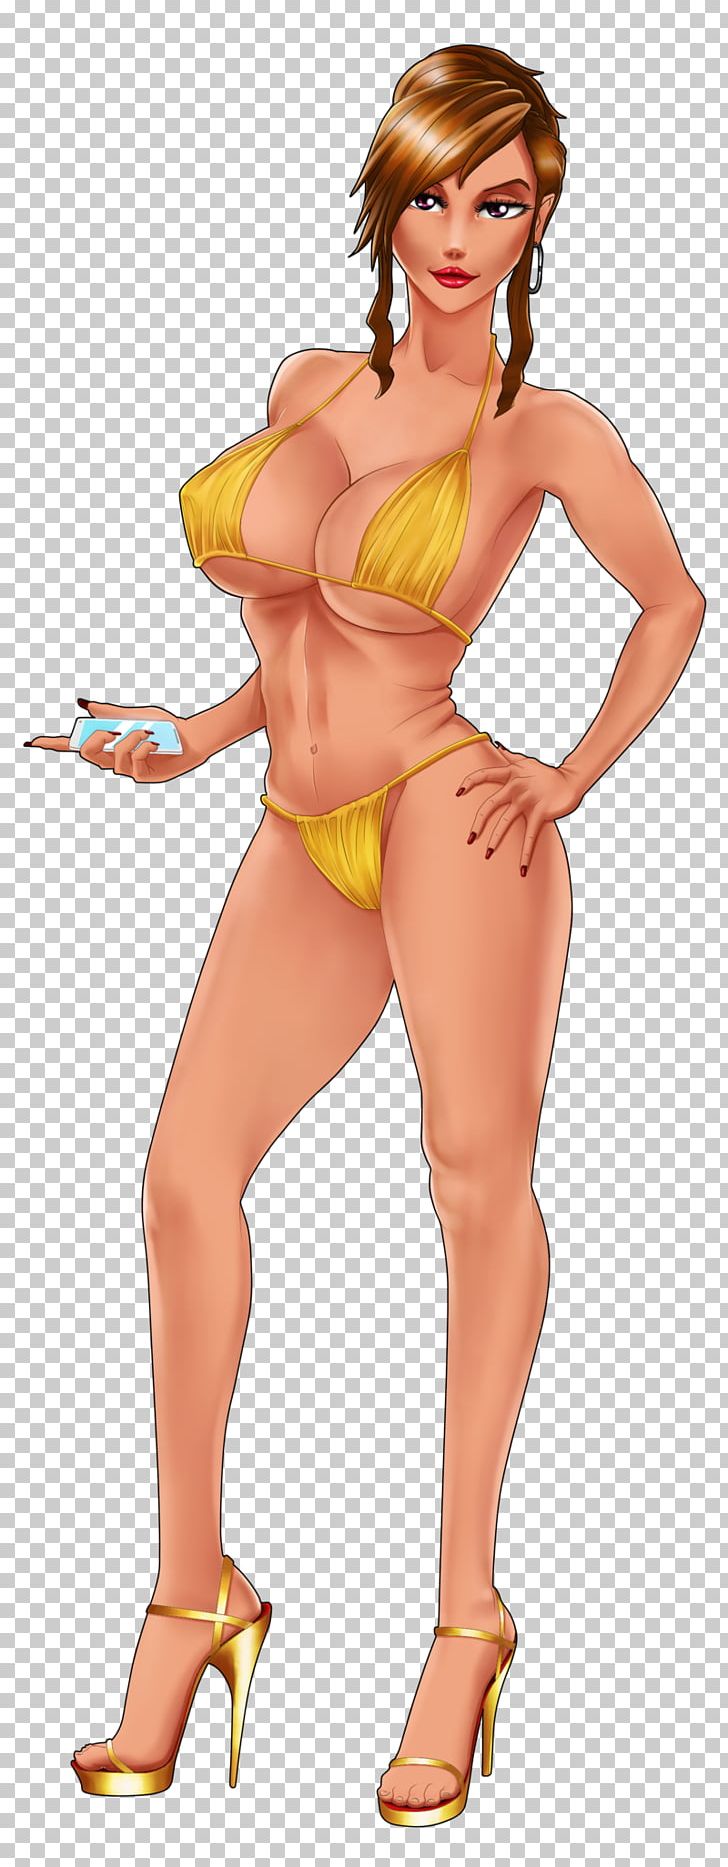 Pin-up Girl Cartoon Swimsuit Thigh PNG, Clipart, Abdomen, Breast, Brown, Brown Hair, Cartoon Free PNG Download